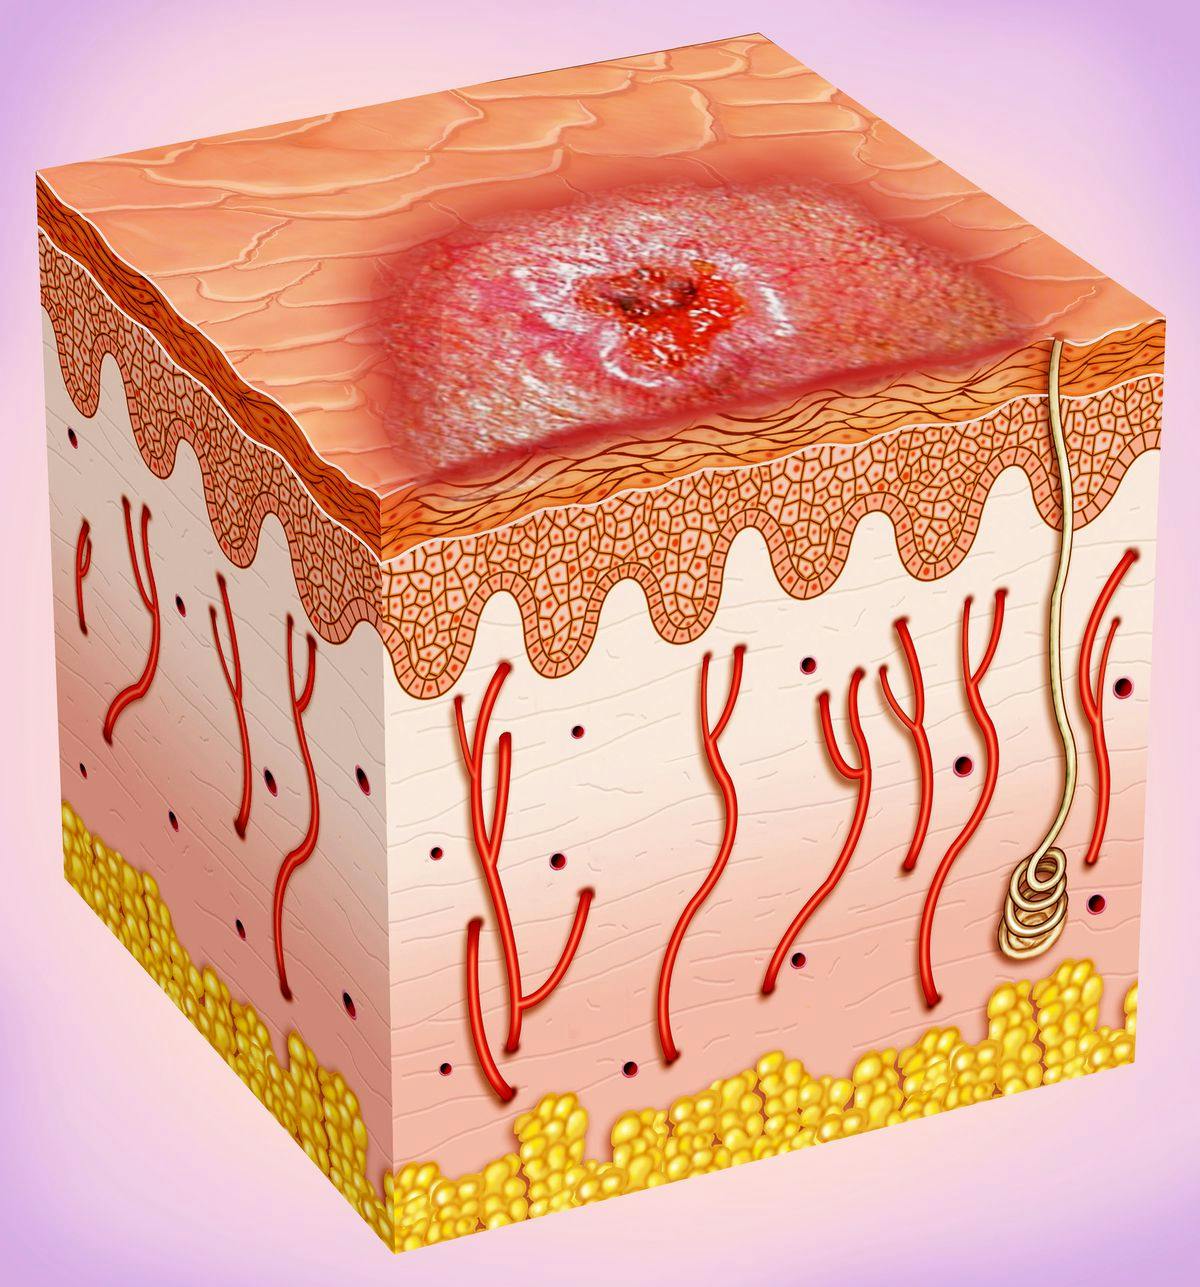 Image of basal cell carcinoma